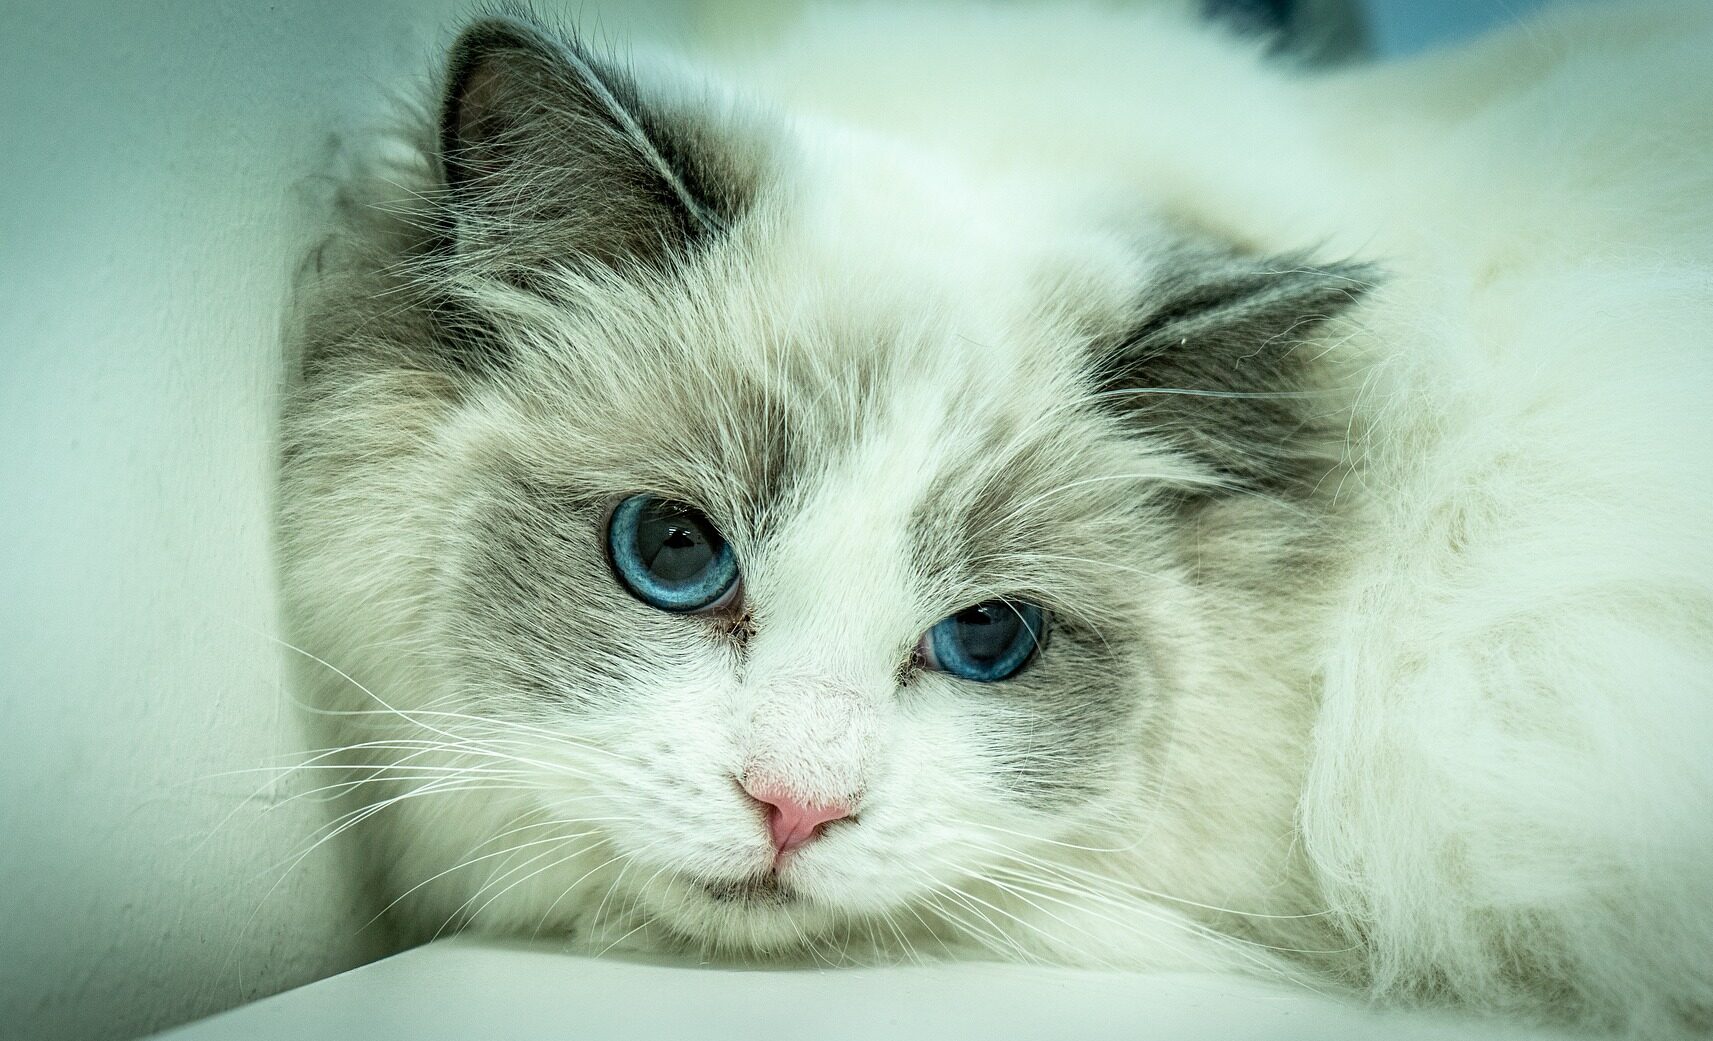 Ragdoll Cats – The Chubbiest and Most Popular Cat Breed